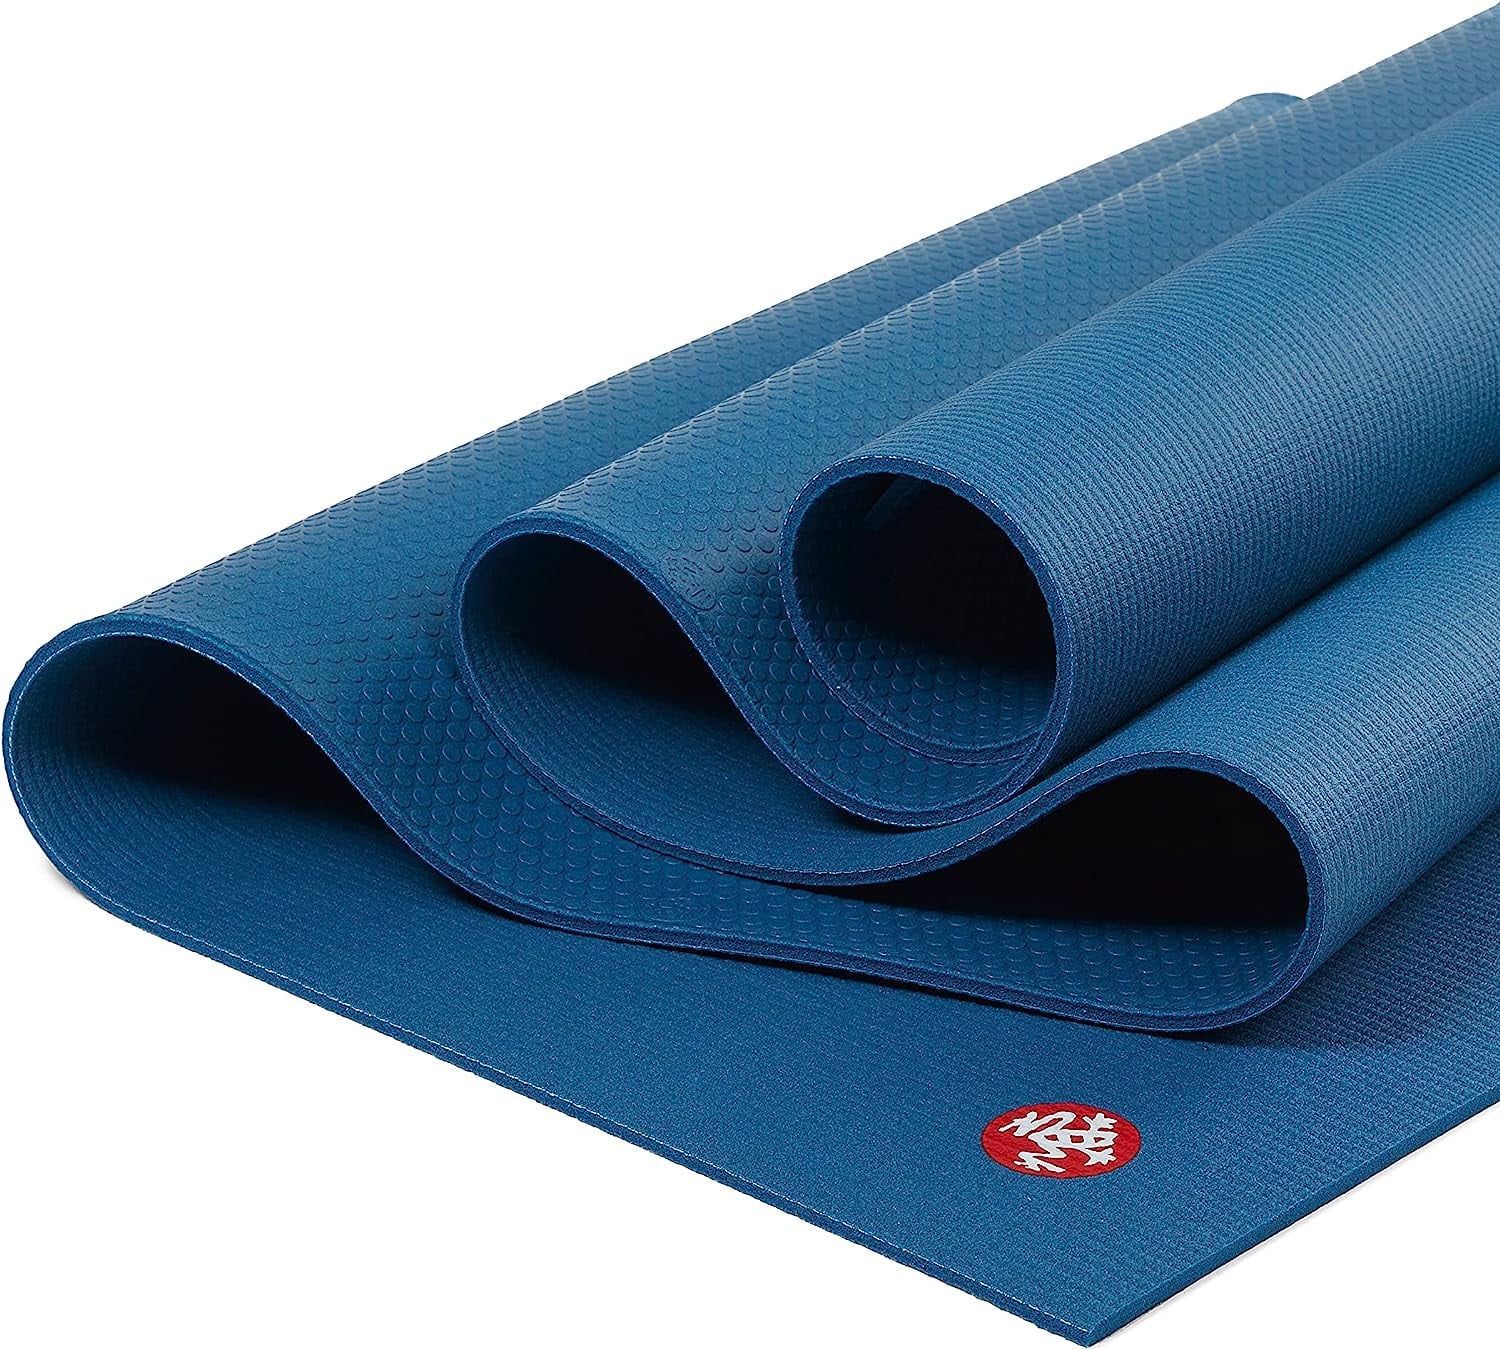 The Best Pilates Mats, According to Instructors and Reviews